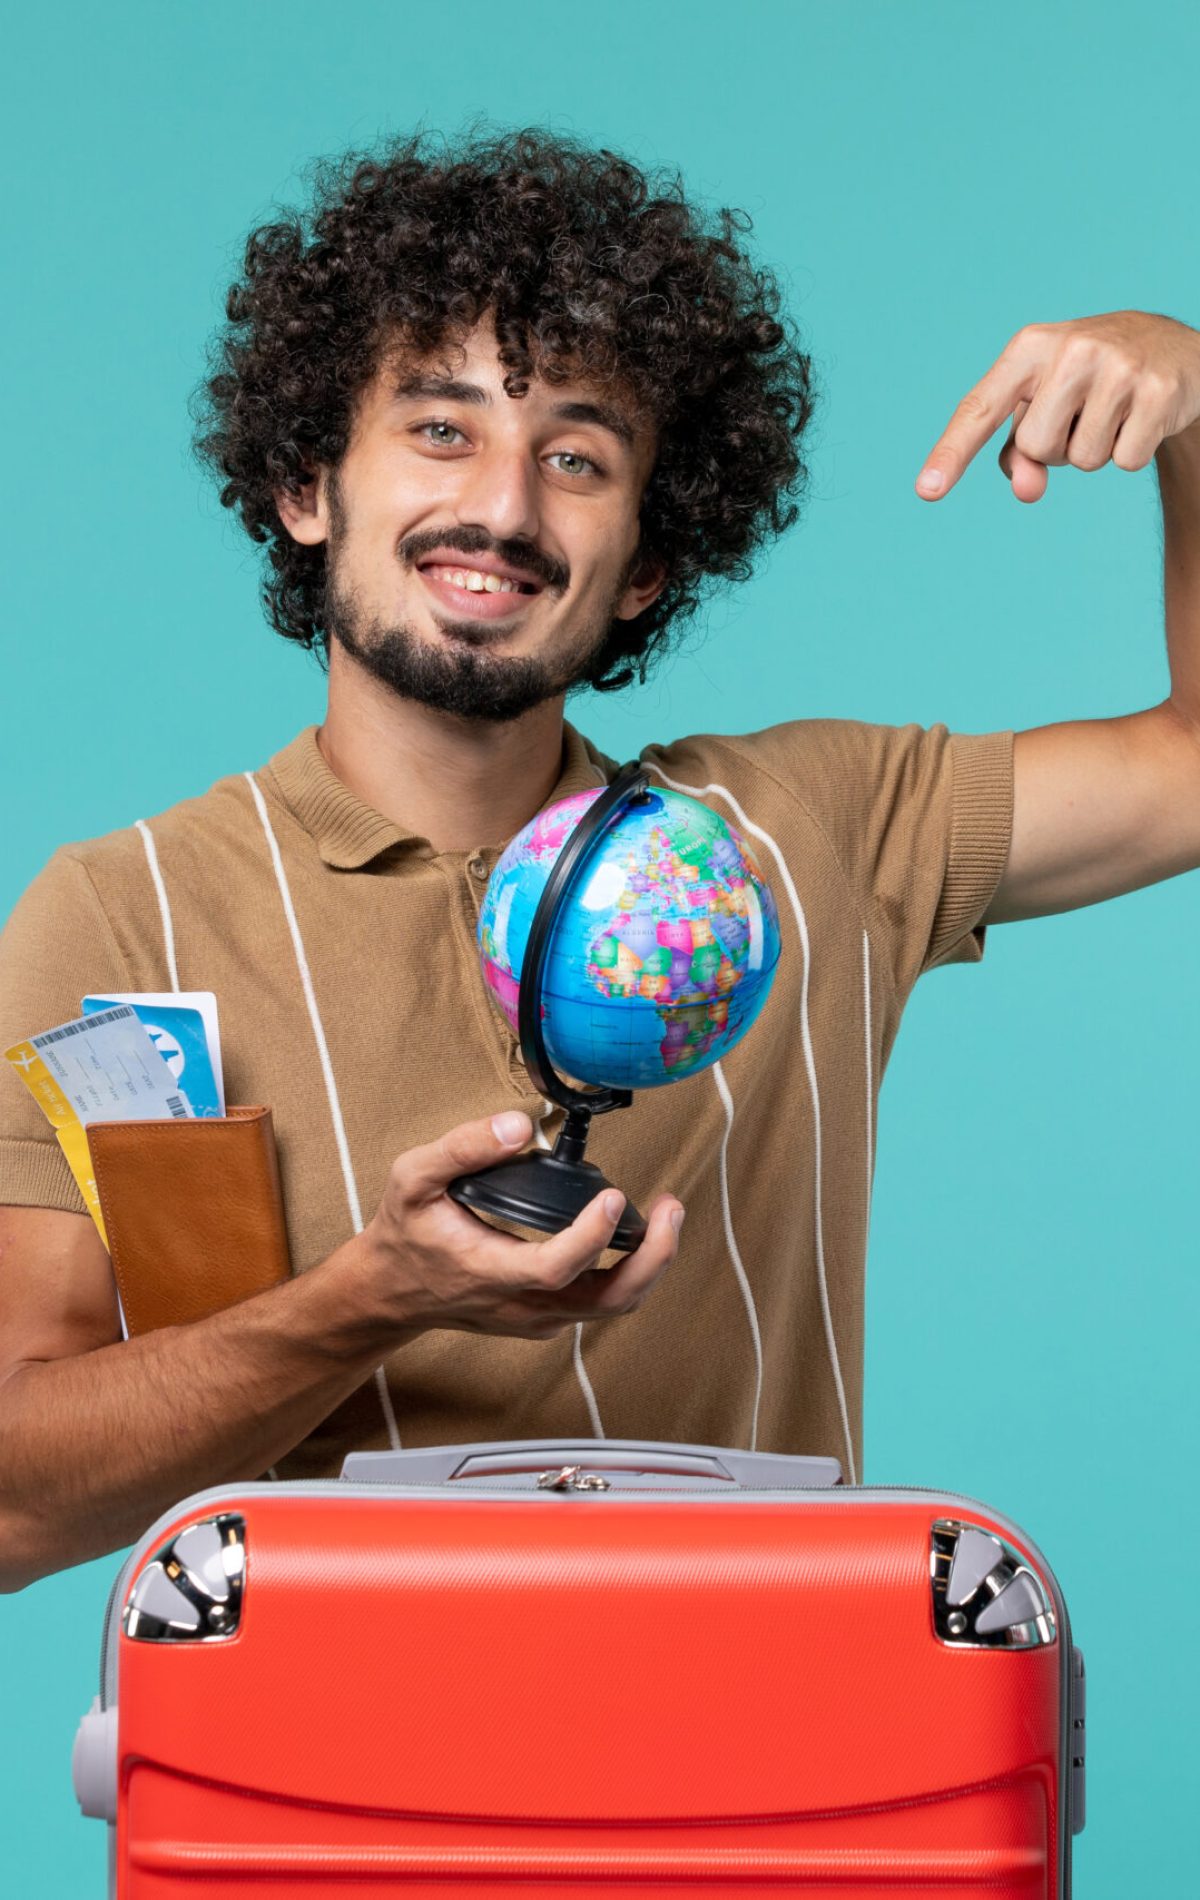 front-view-man-vacation-holding-globe-ticket-blue